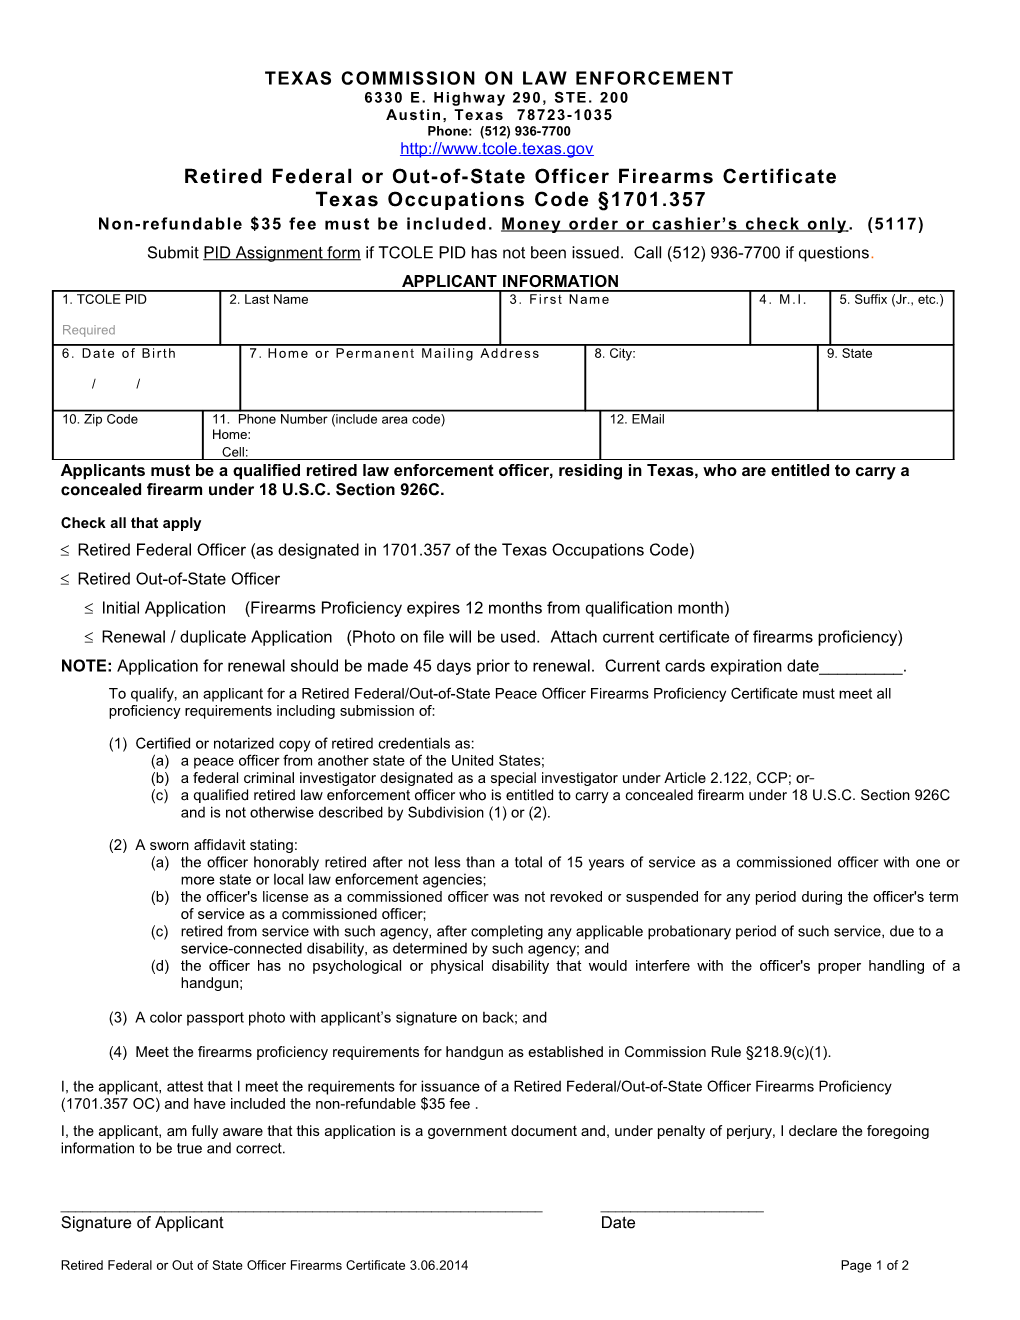 Retired Federal Or Out-Of-State Officer Firearms Certificate